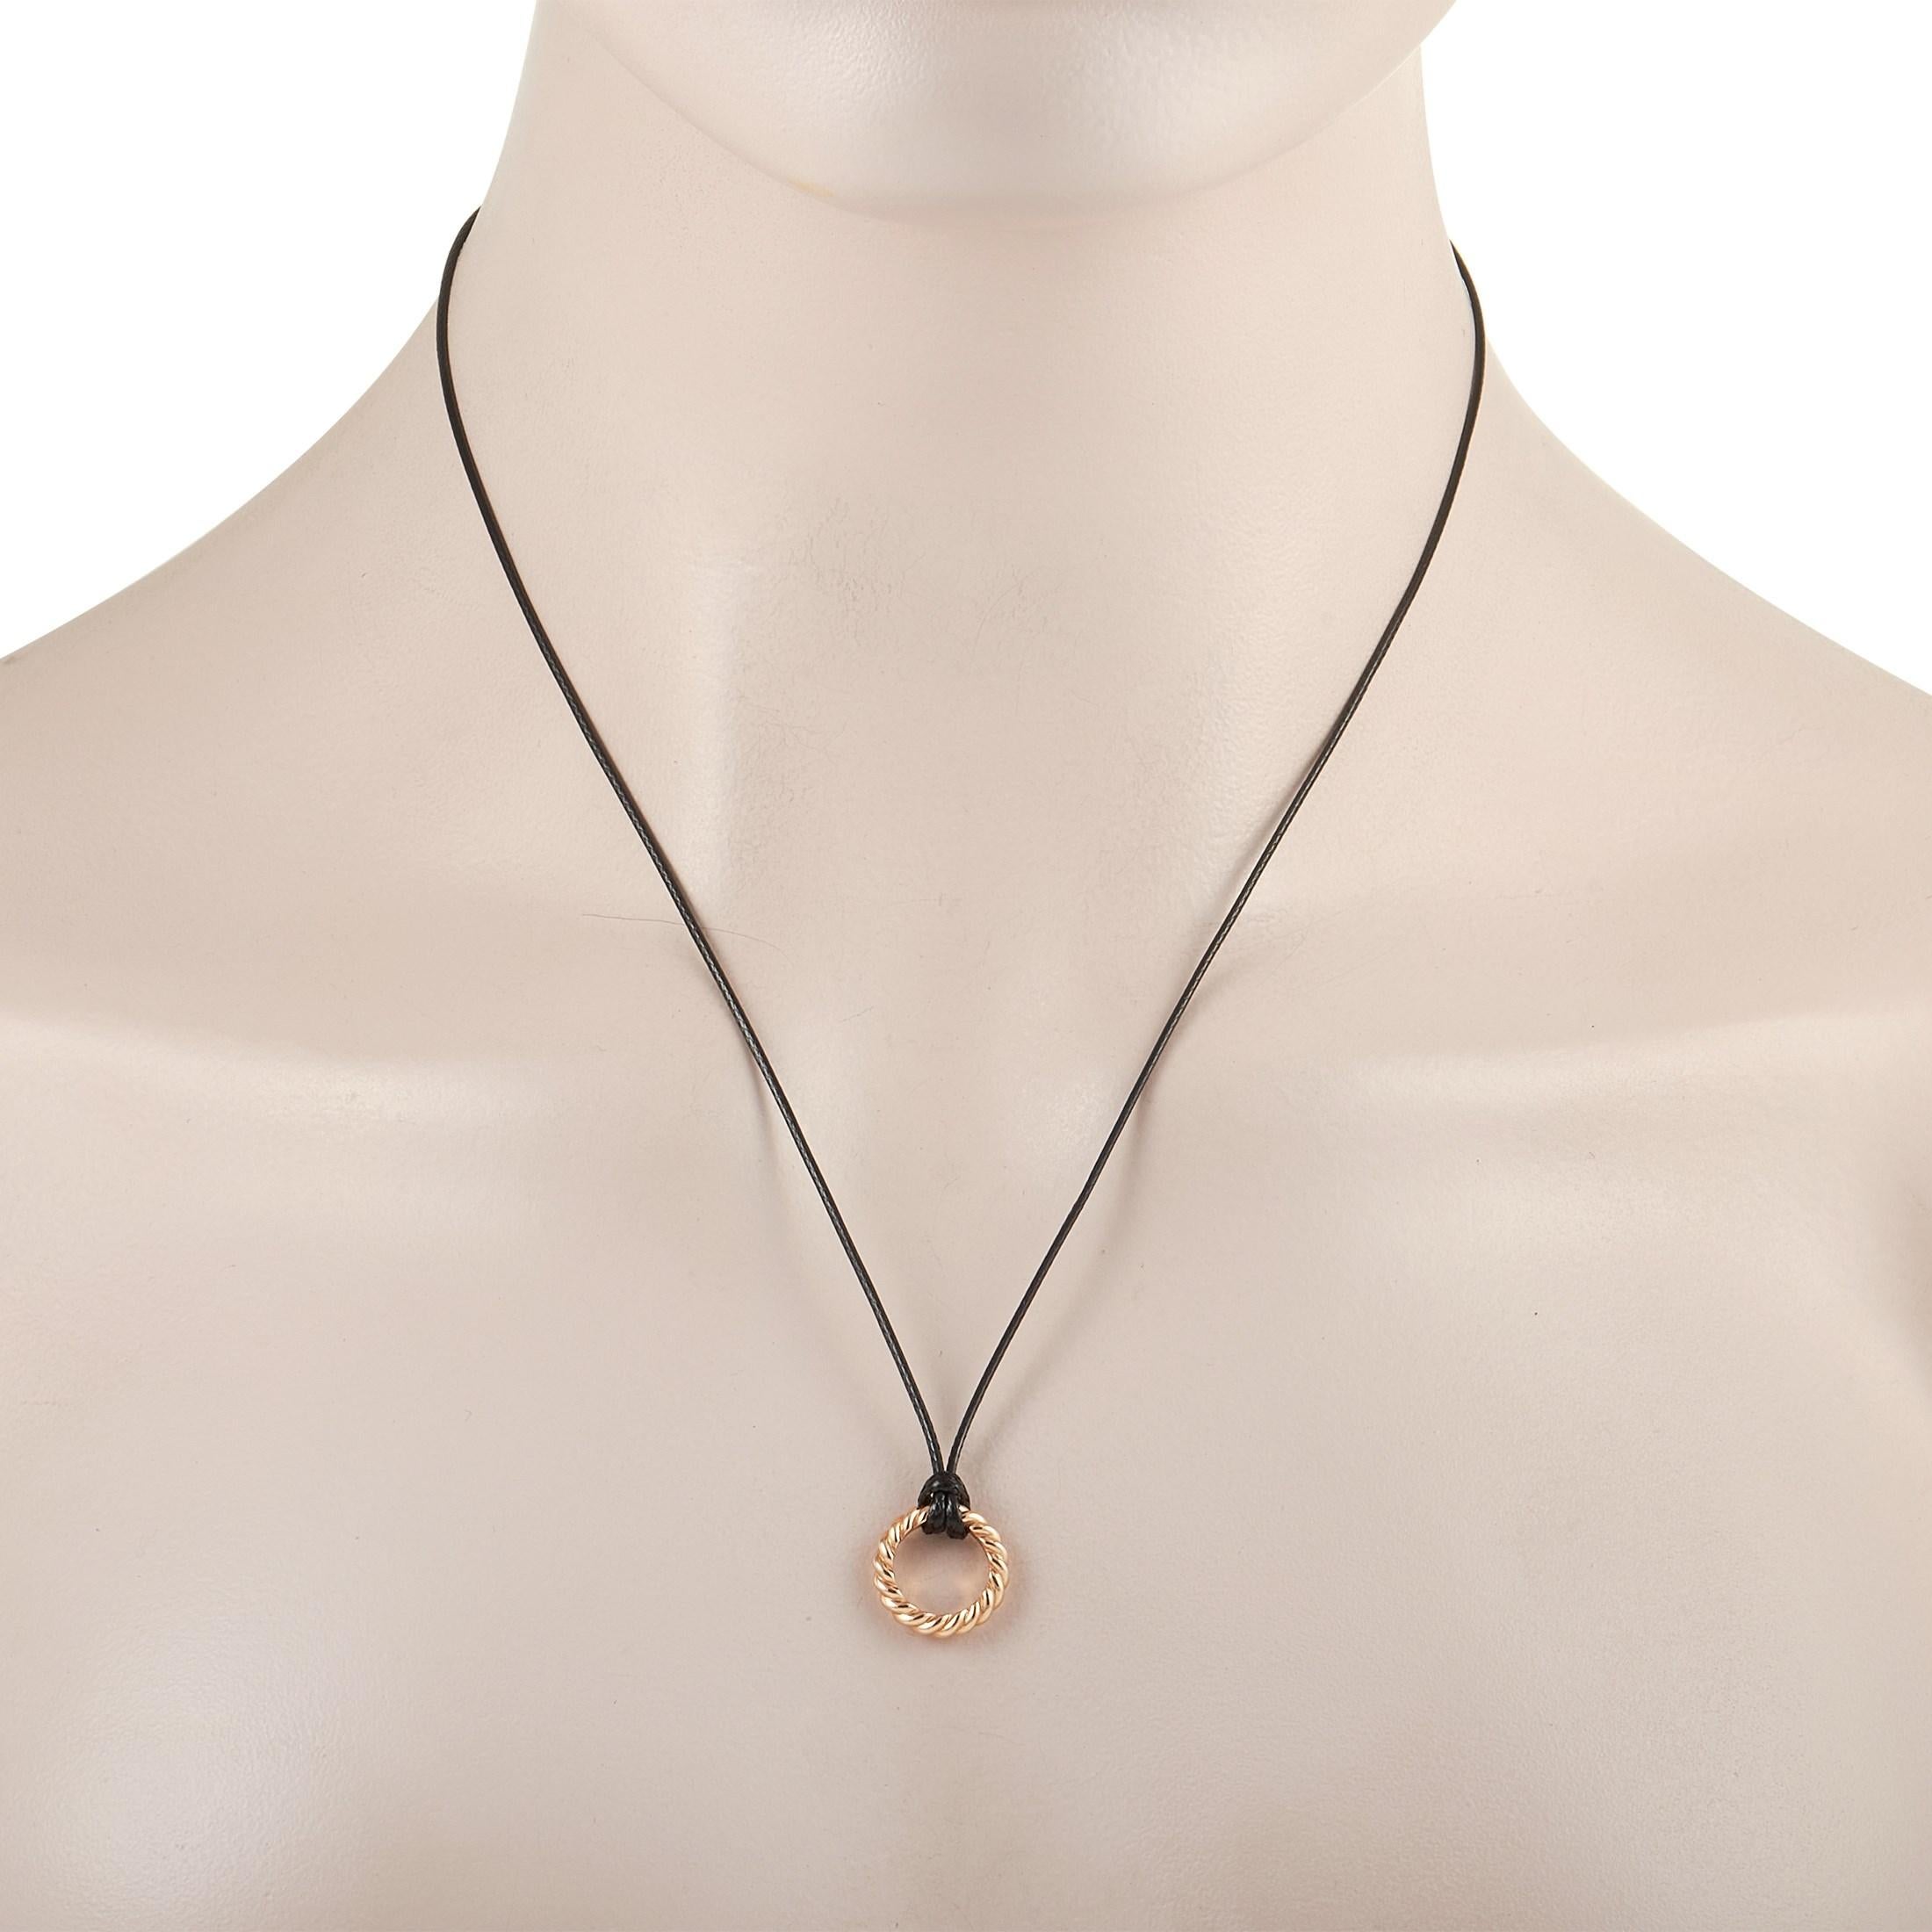 This pretty Pomellato Milano 18K Rose Gold Circle Pendant Necklace is made with a black cord measuring 24 inches and featuring a braided hollow circle pendant made from 18K rose gold. The pendant measures 0.50 inches in length by 0.50 inches in